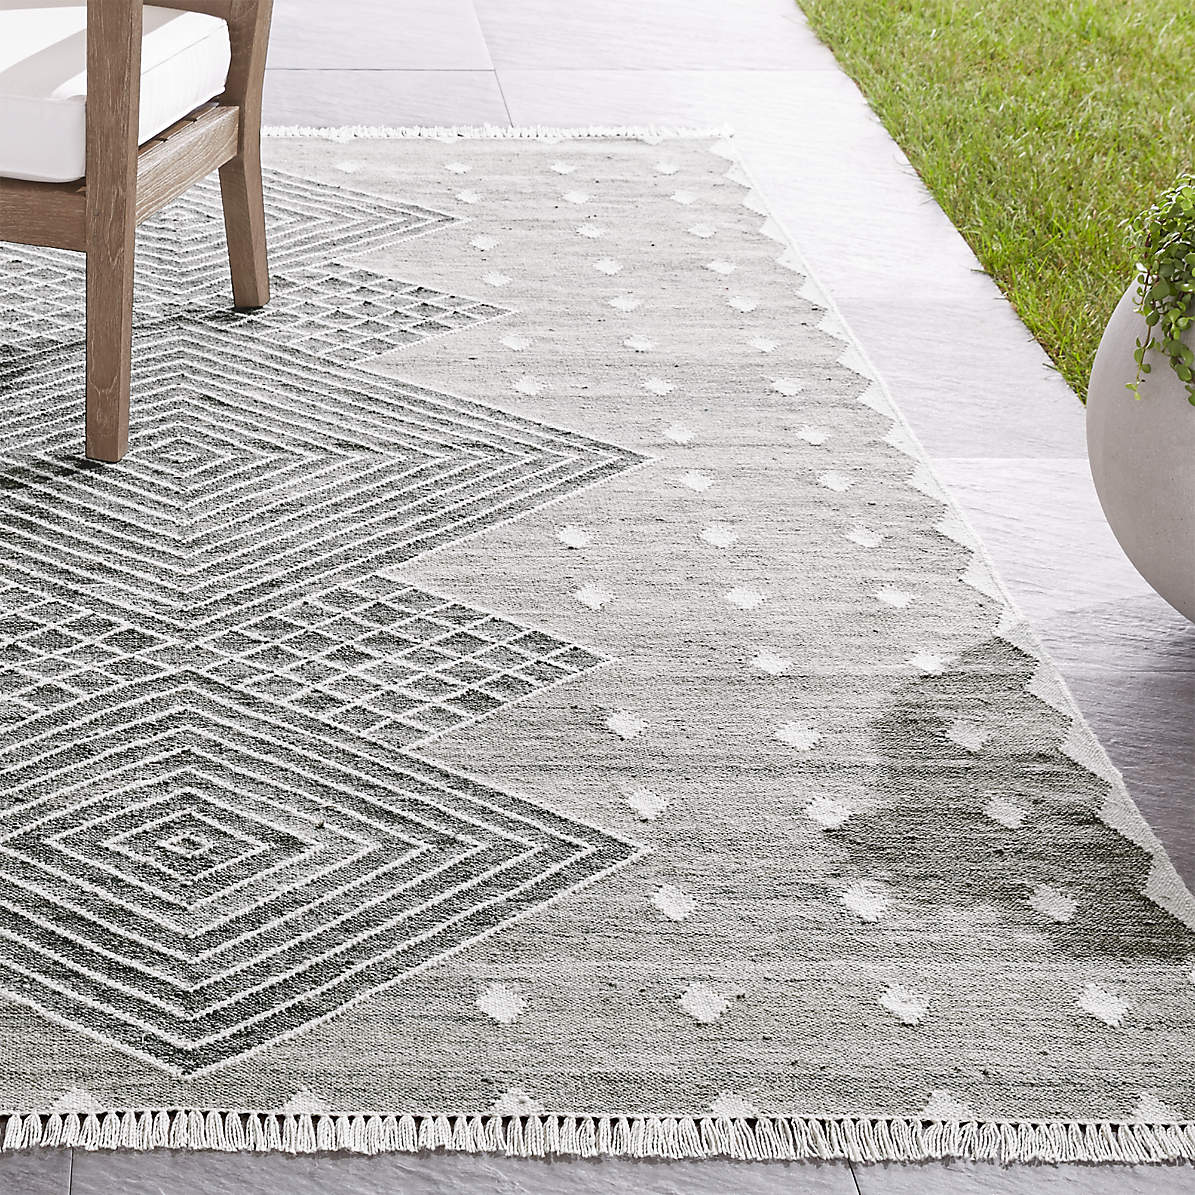 Ceri Grey Indoor Outdoor Rug Crate, What Are The Best Outdoor Rugs Made Of Recycled Plastic